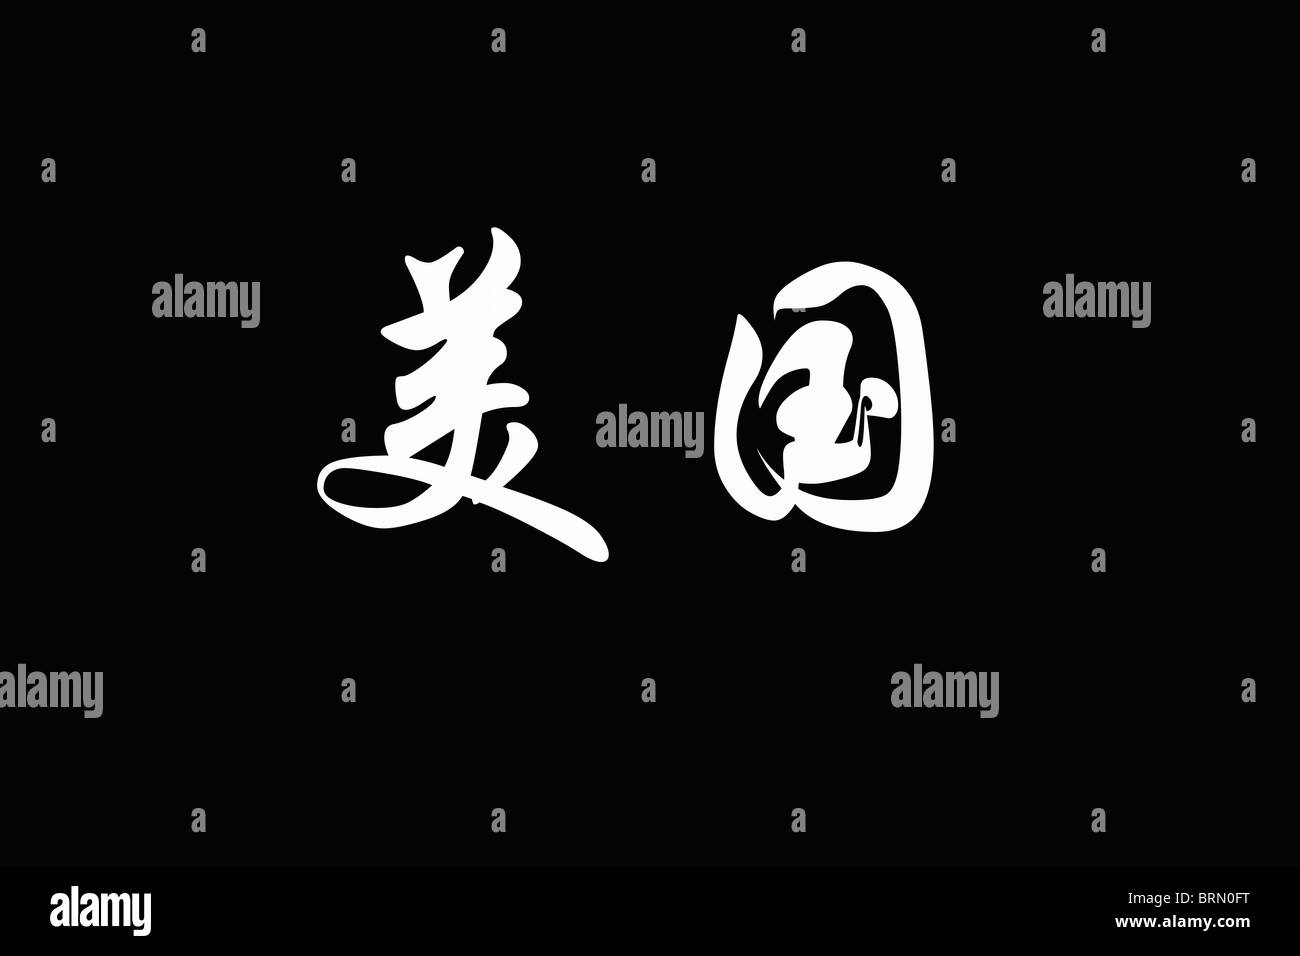 Chinese characters of AMERICA on black background Stock Photo